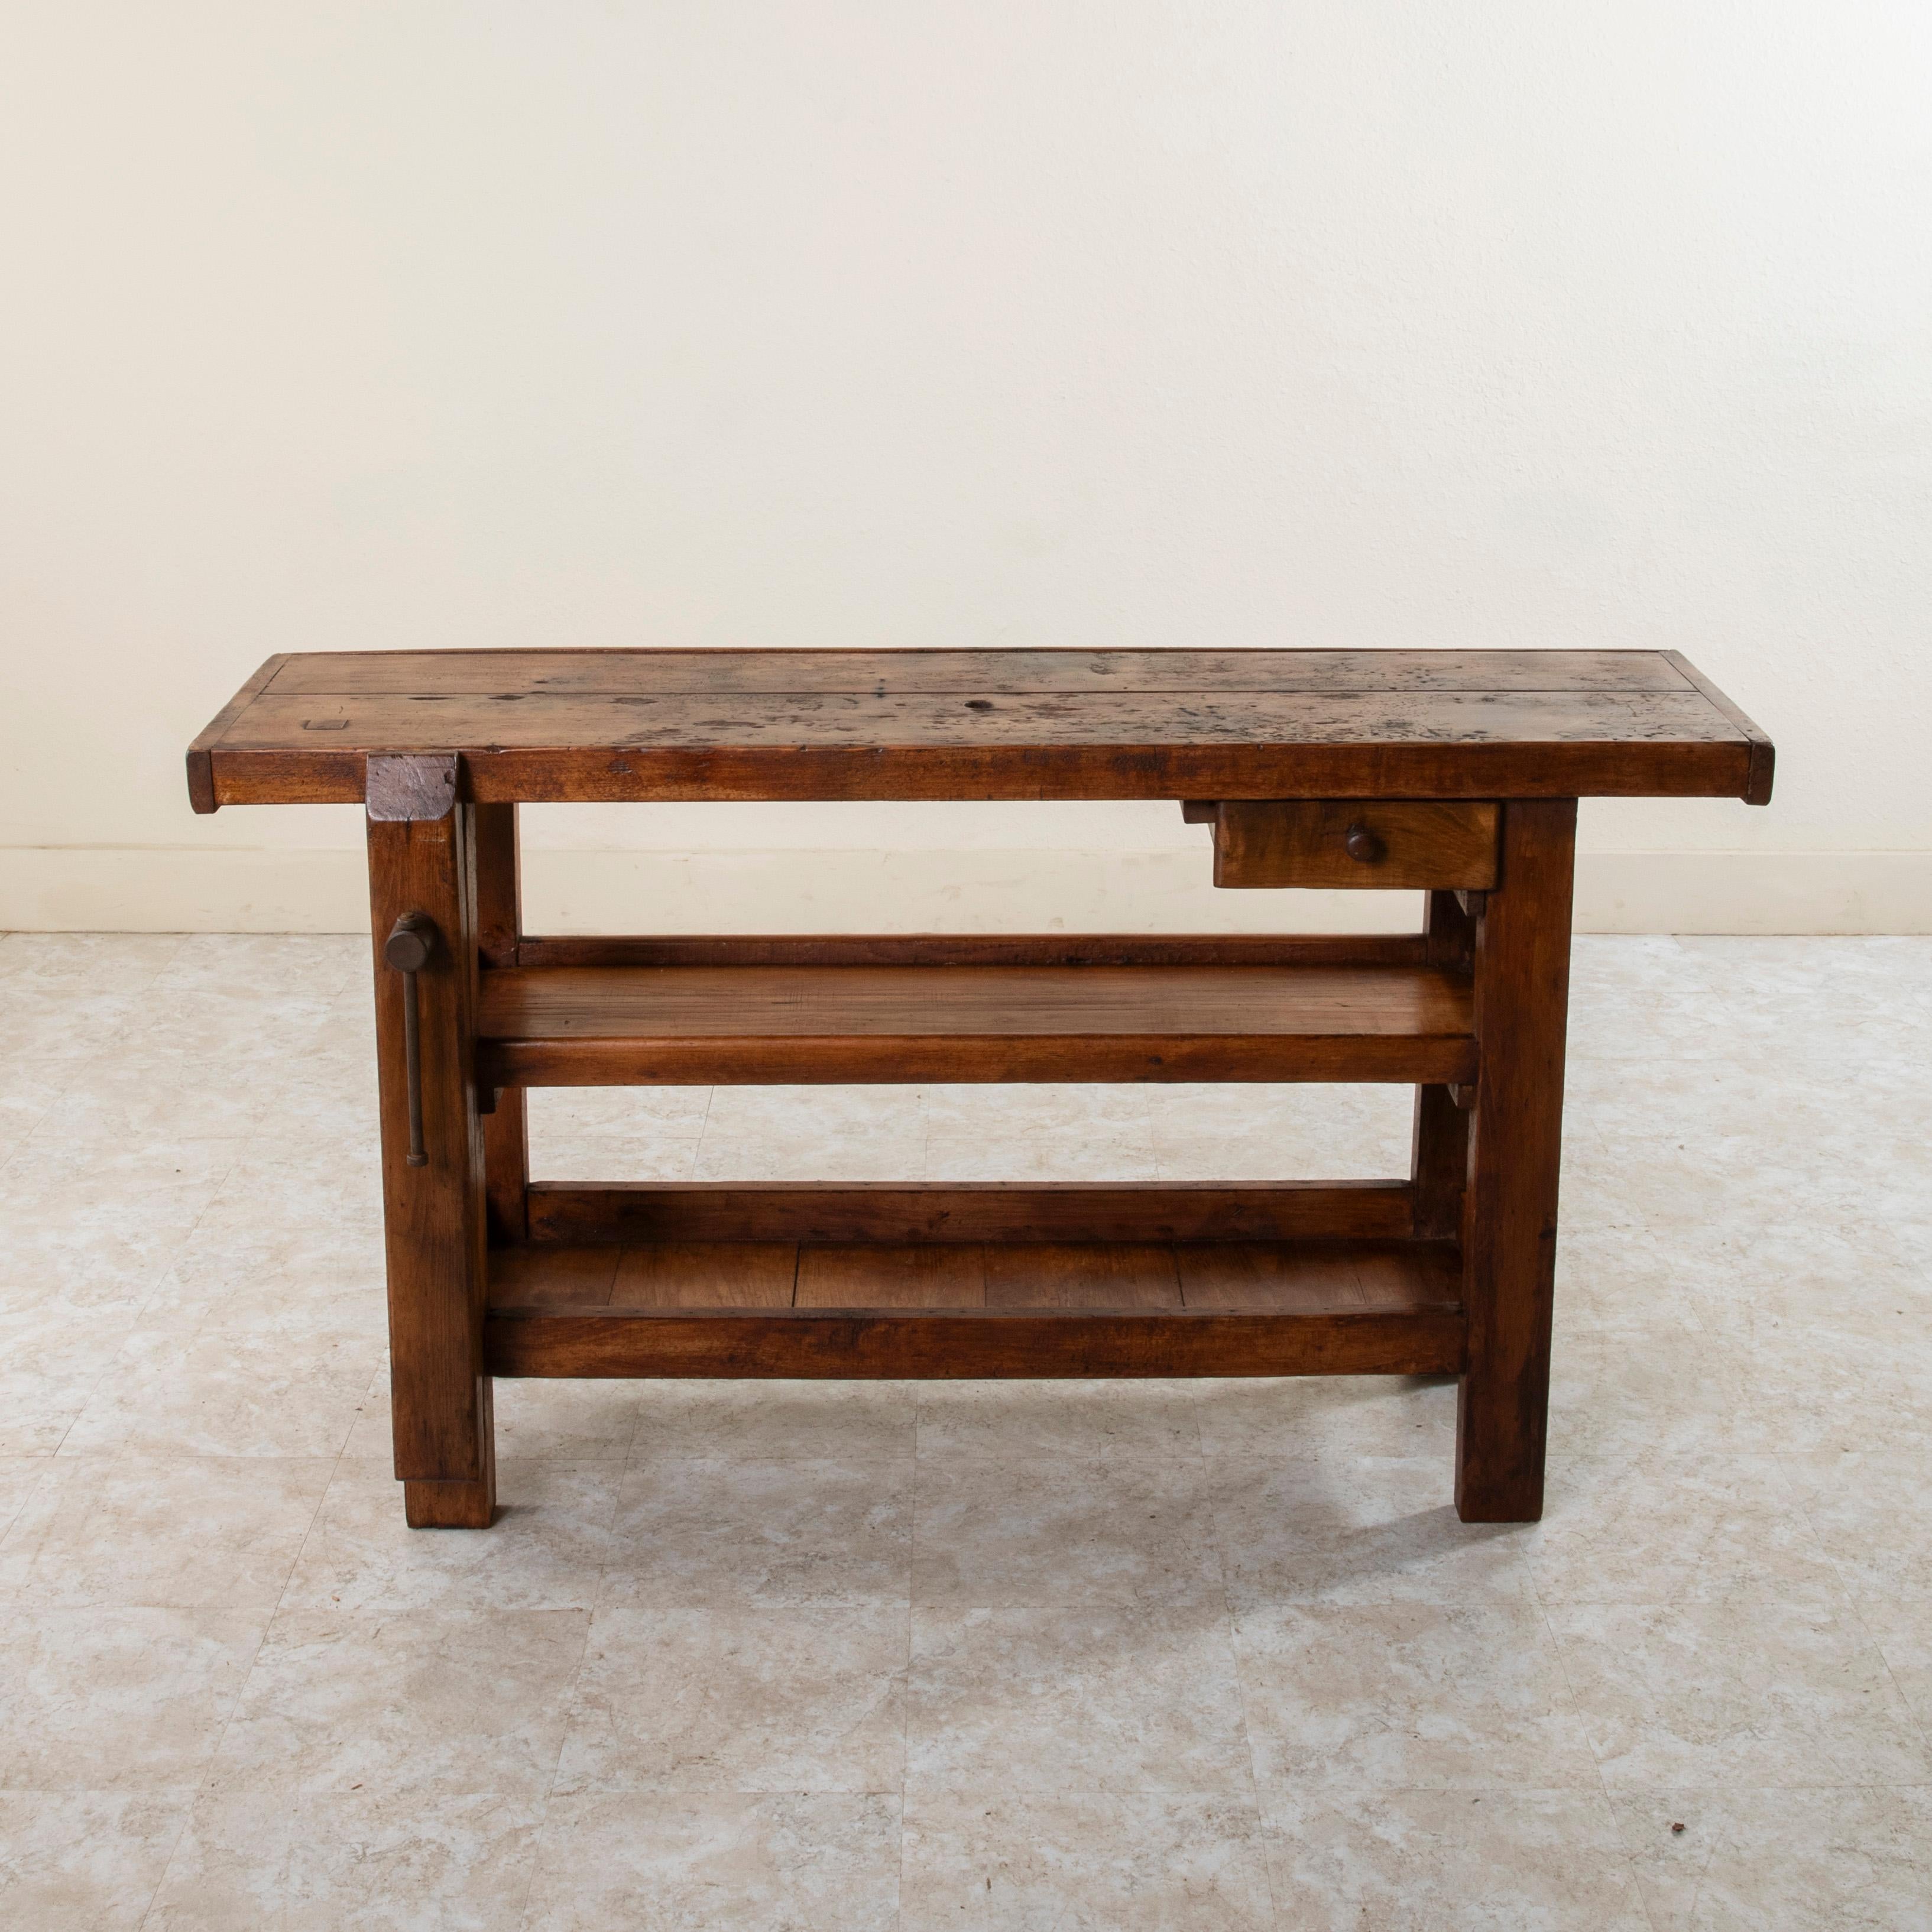 This late nineteenth century beechwood and oak workbench from Normandy, France, features two slots at the back of its two inch thick top once used to store the artisan's tools close at hand. Its single drawer and two lower shelves provide ample